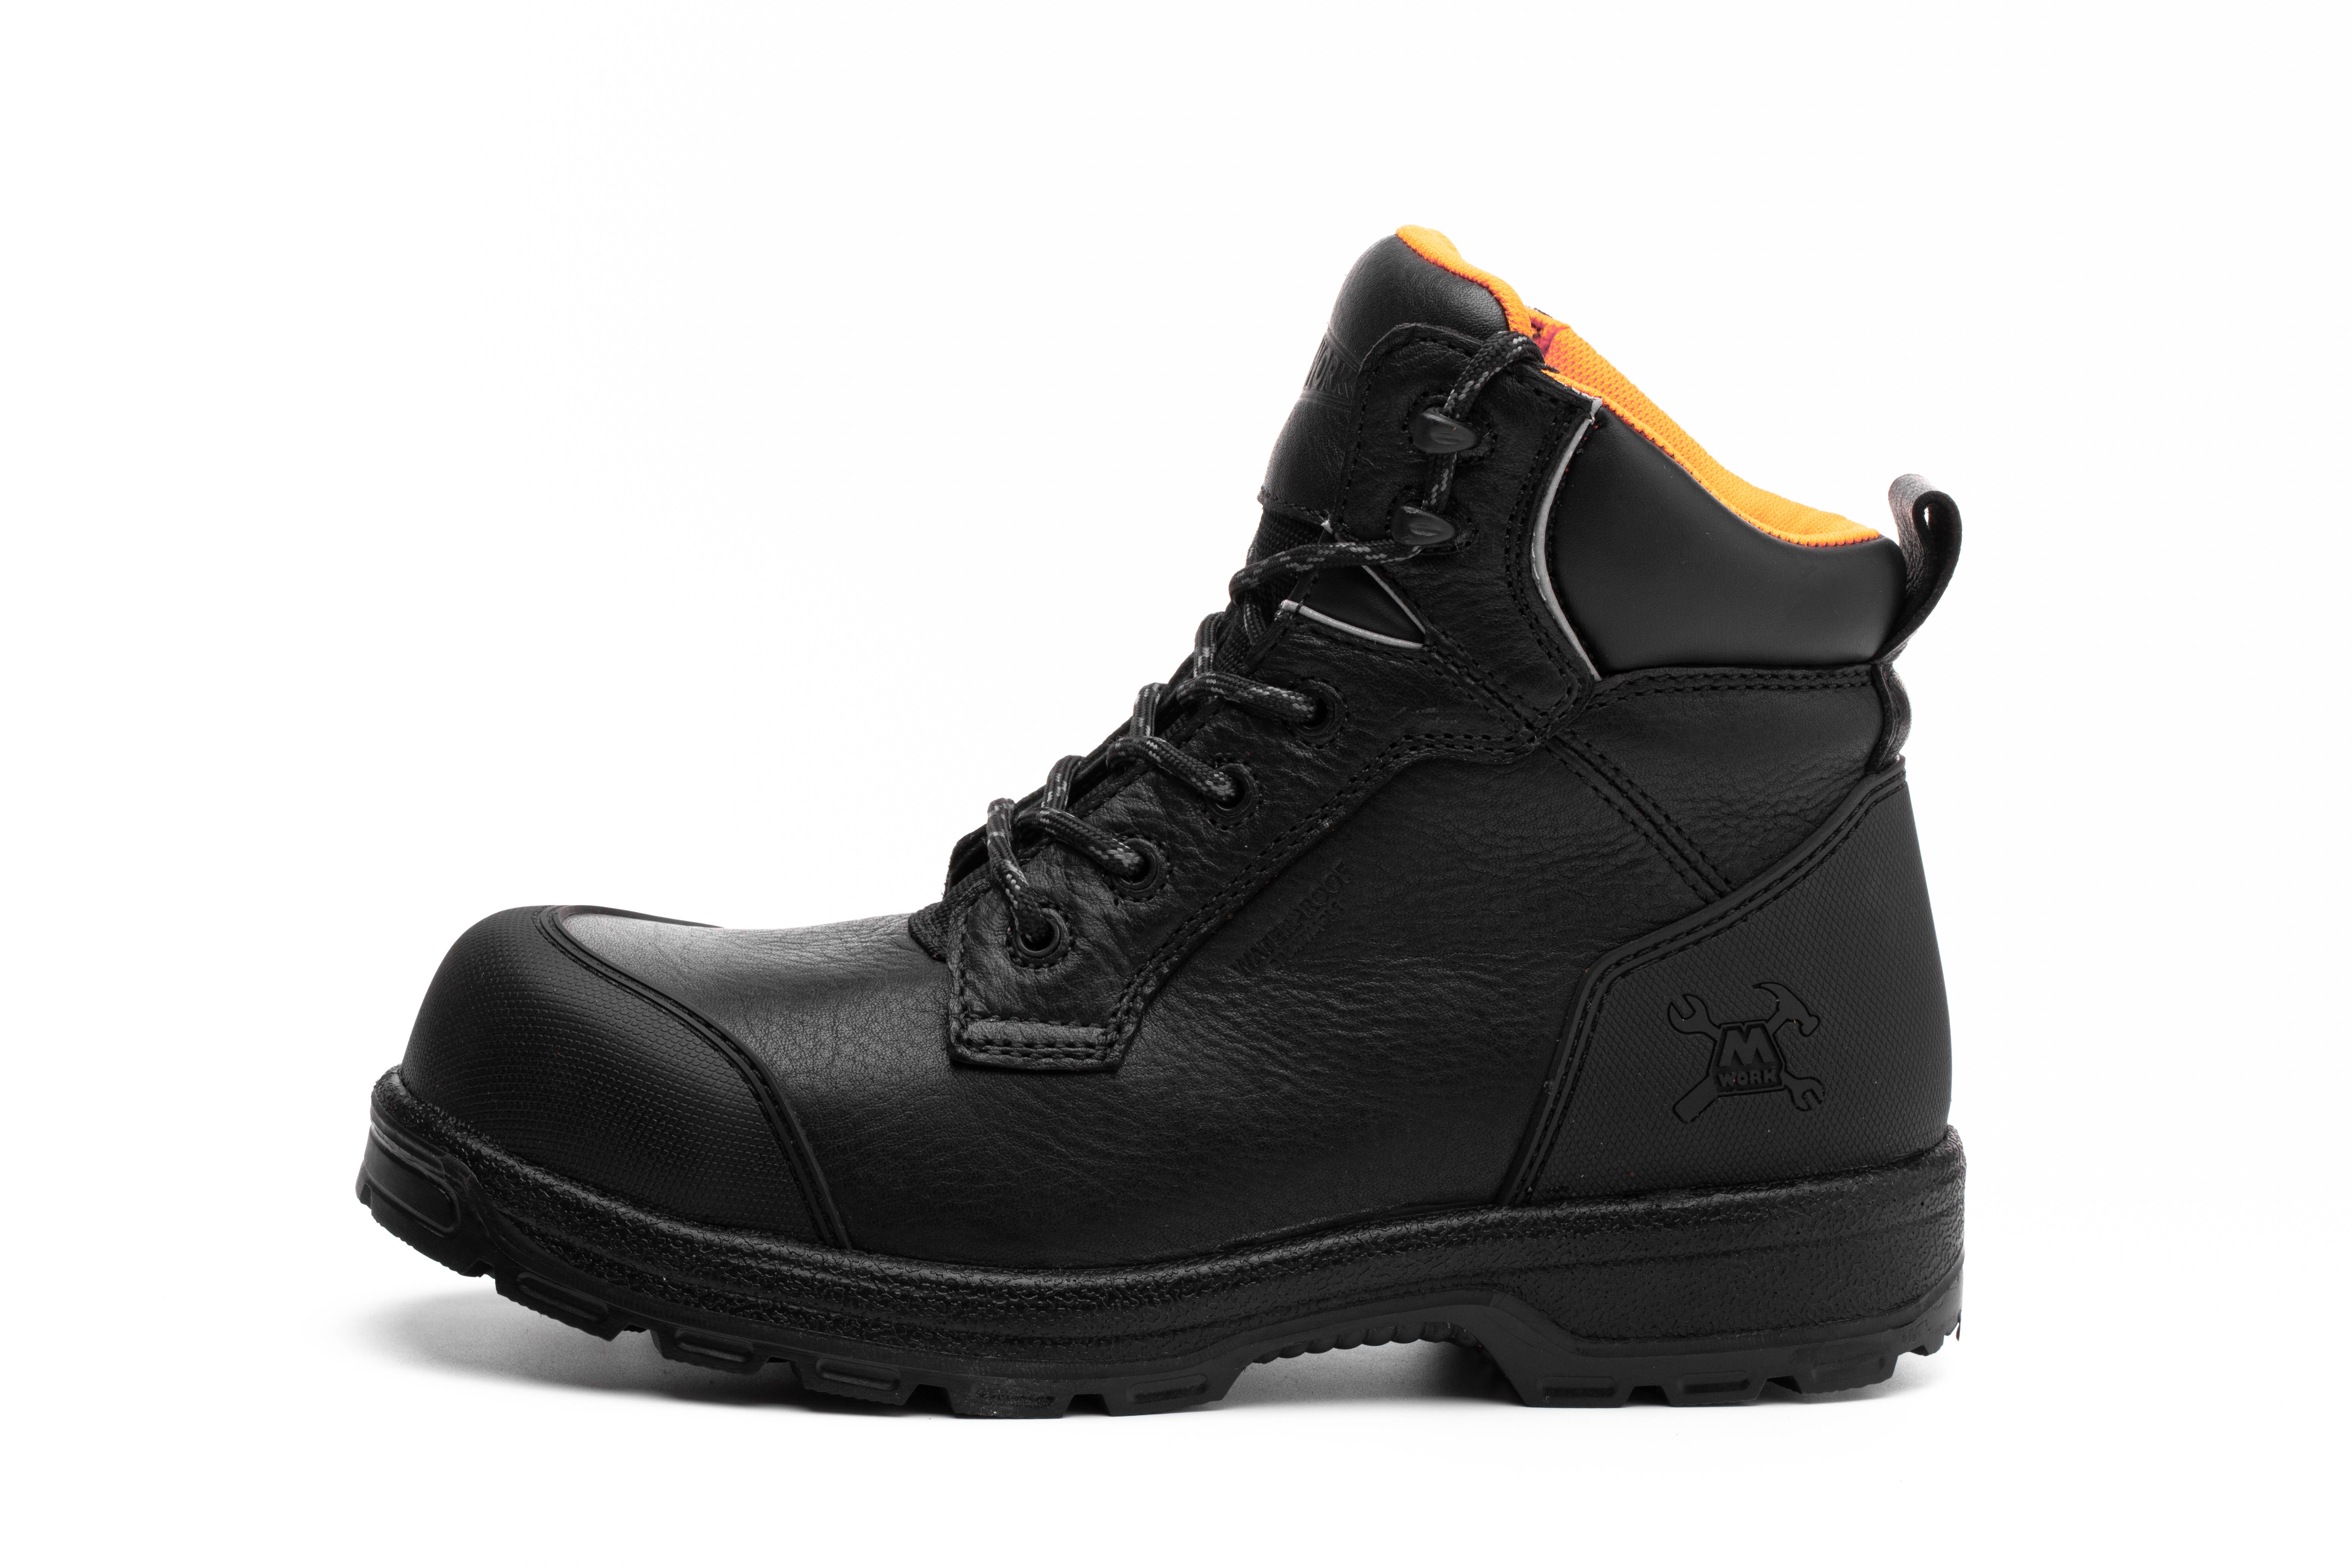 Top Safety Shoes for Industrial Workers: The Ultimate Guide